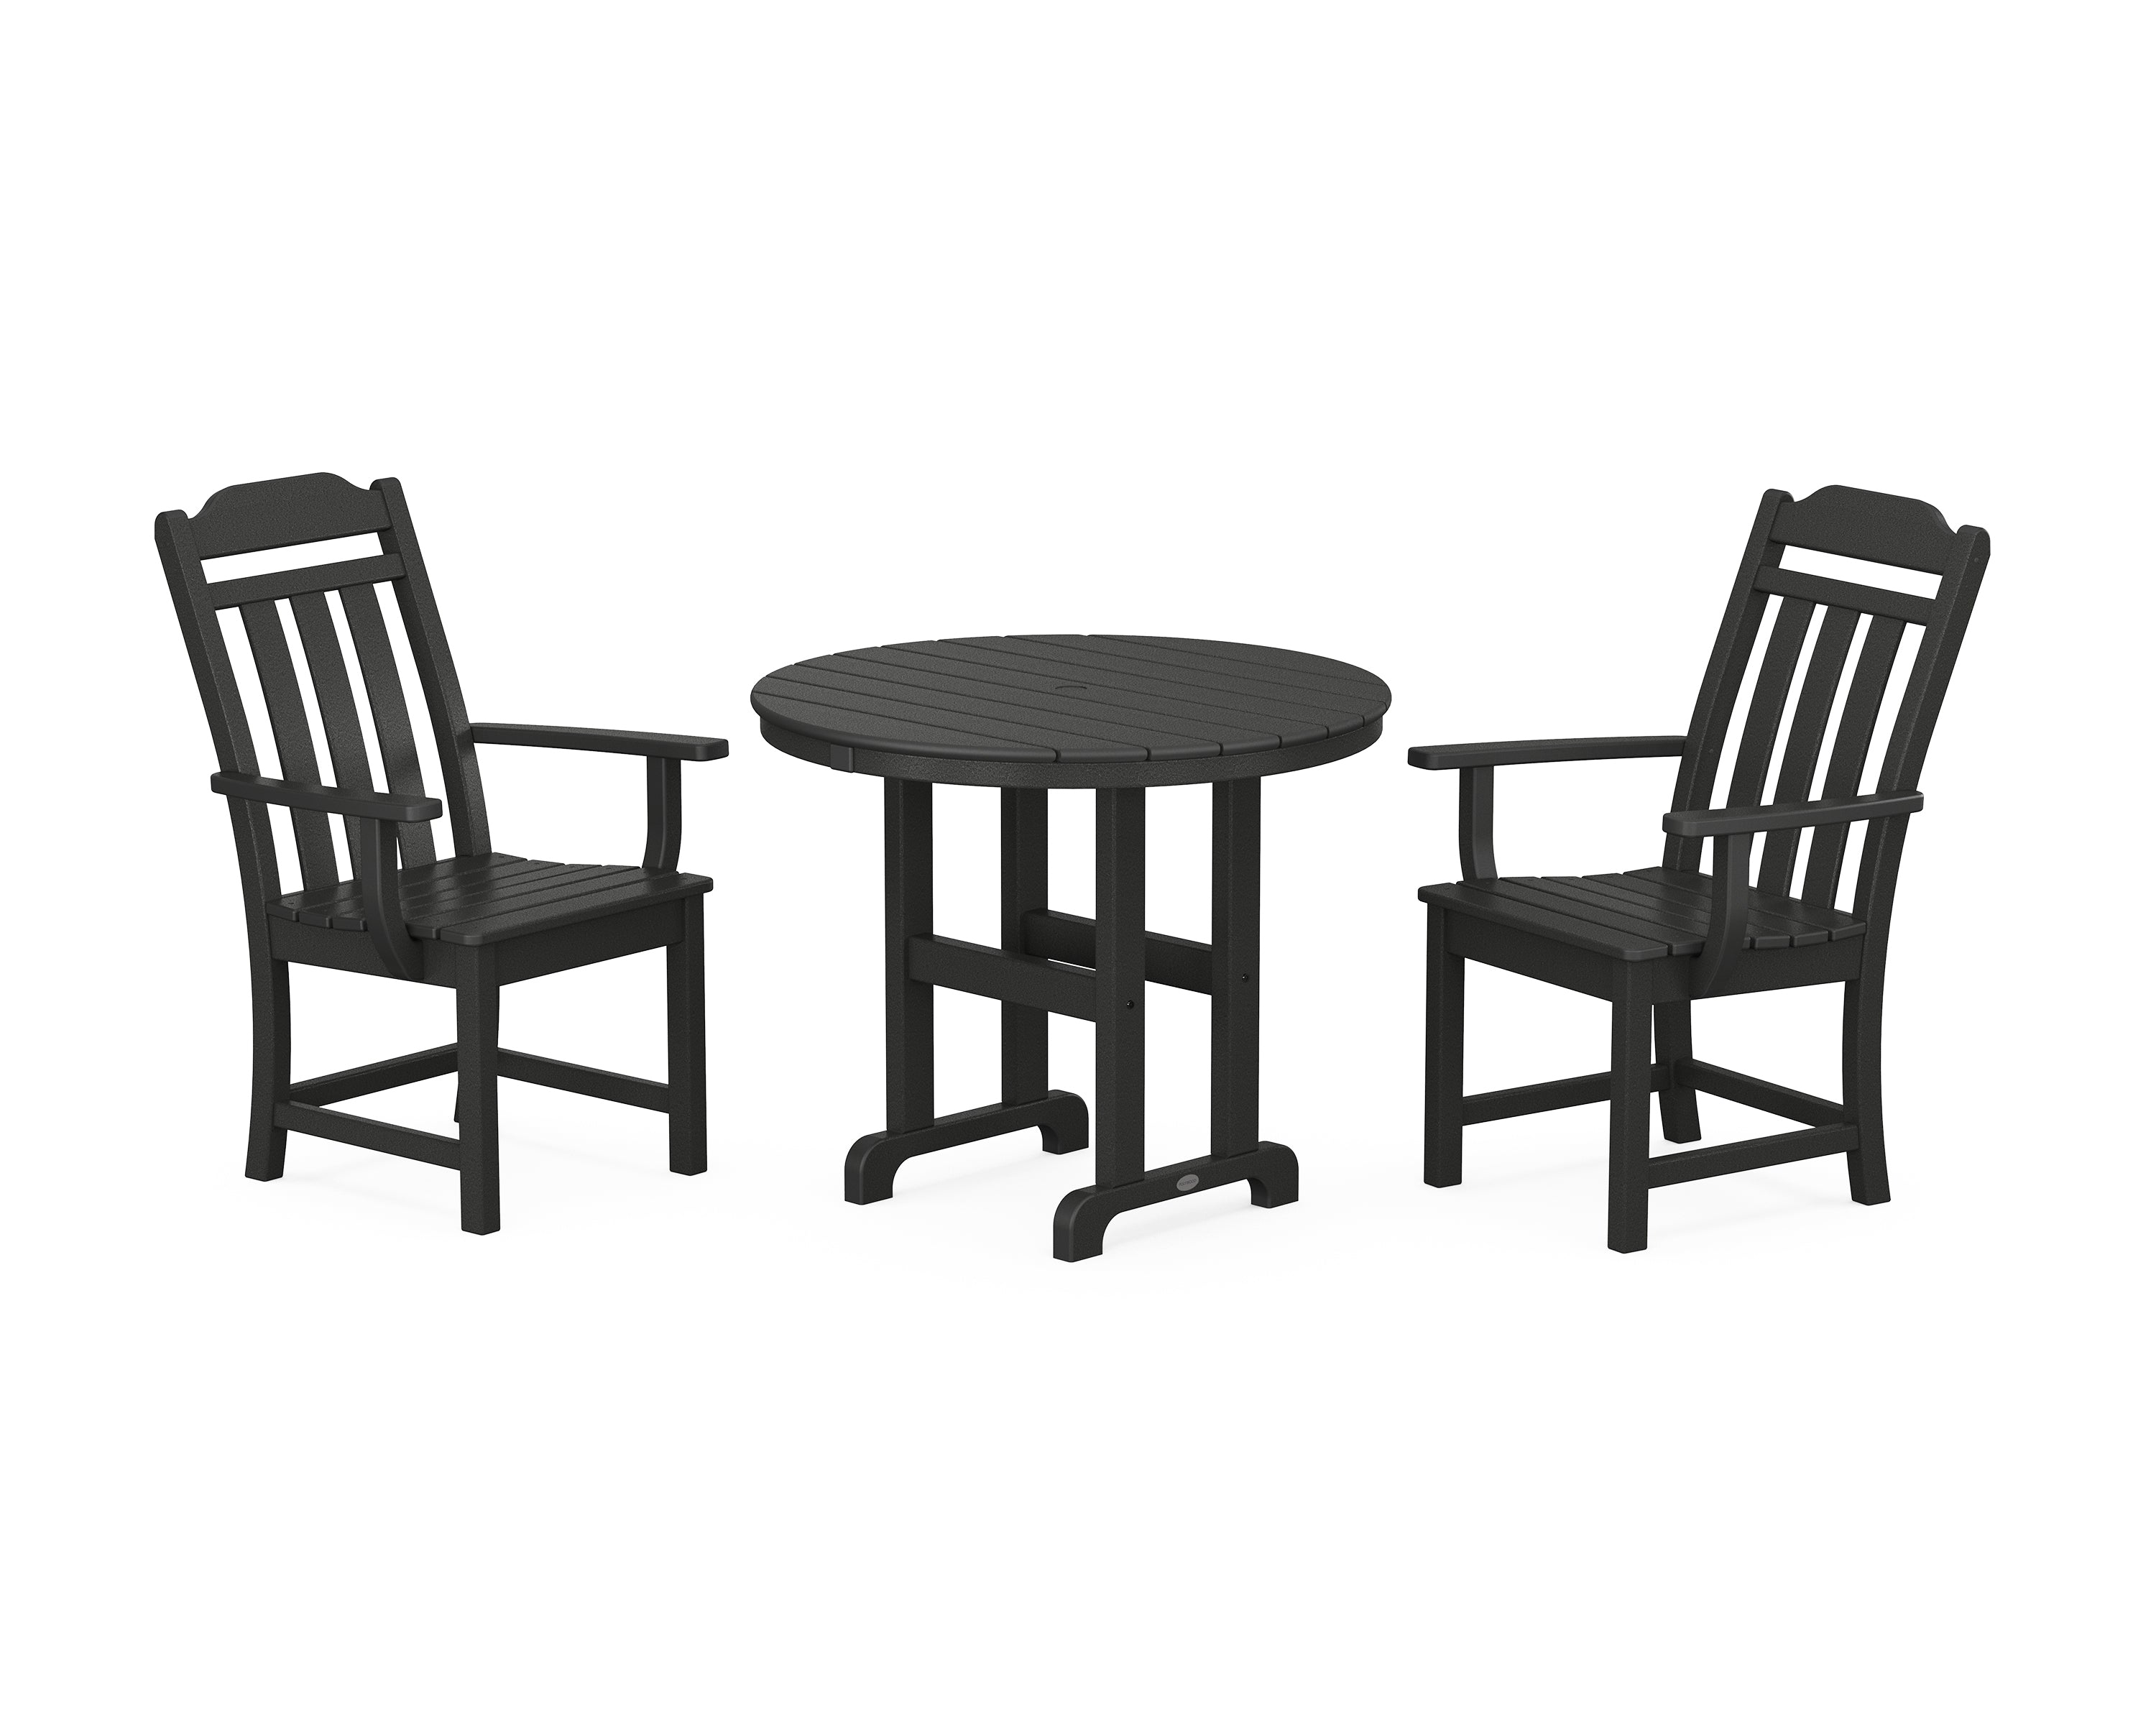 Polywood Country Living 3-Piece Farmhouse Dining Set in Black